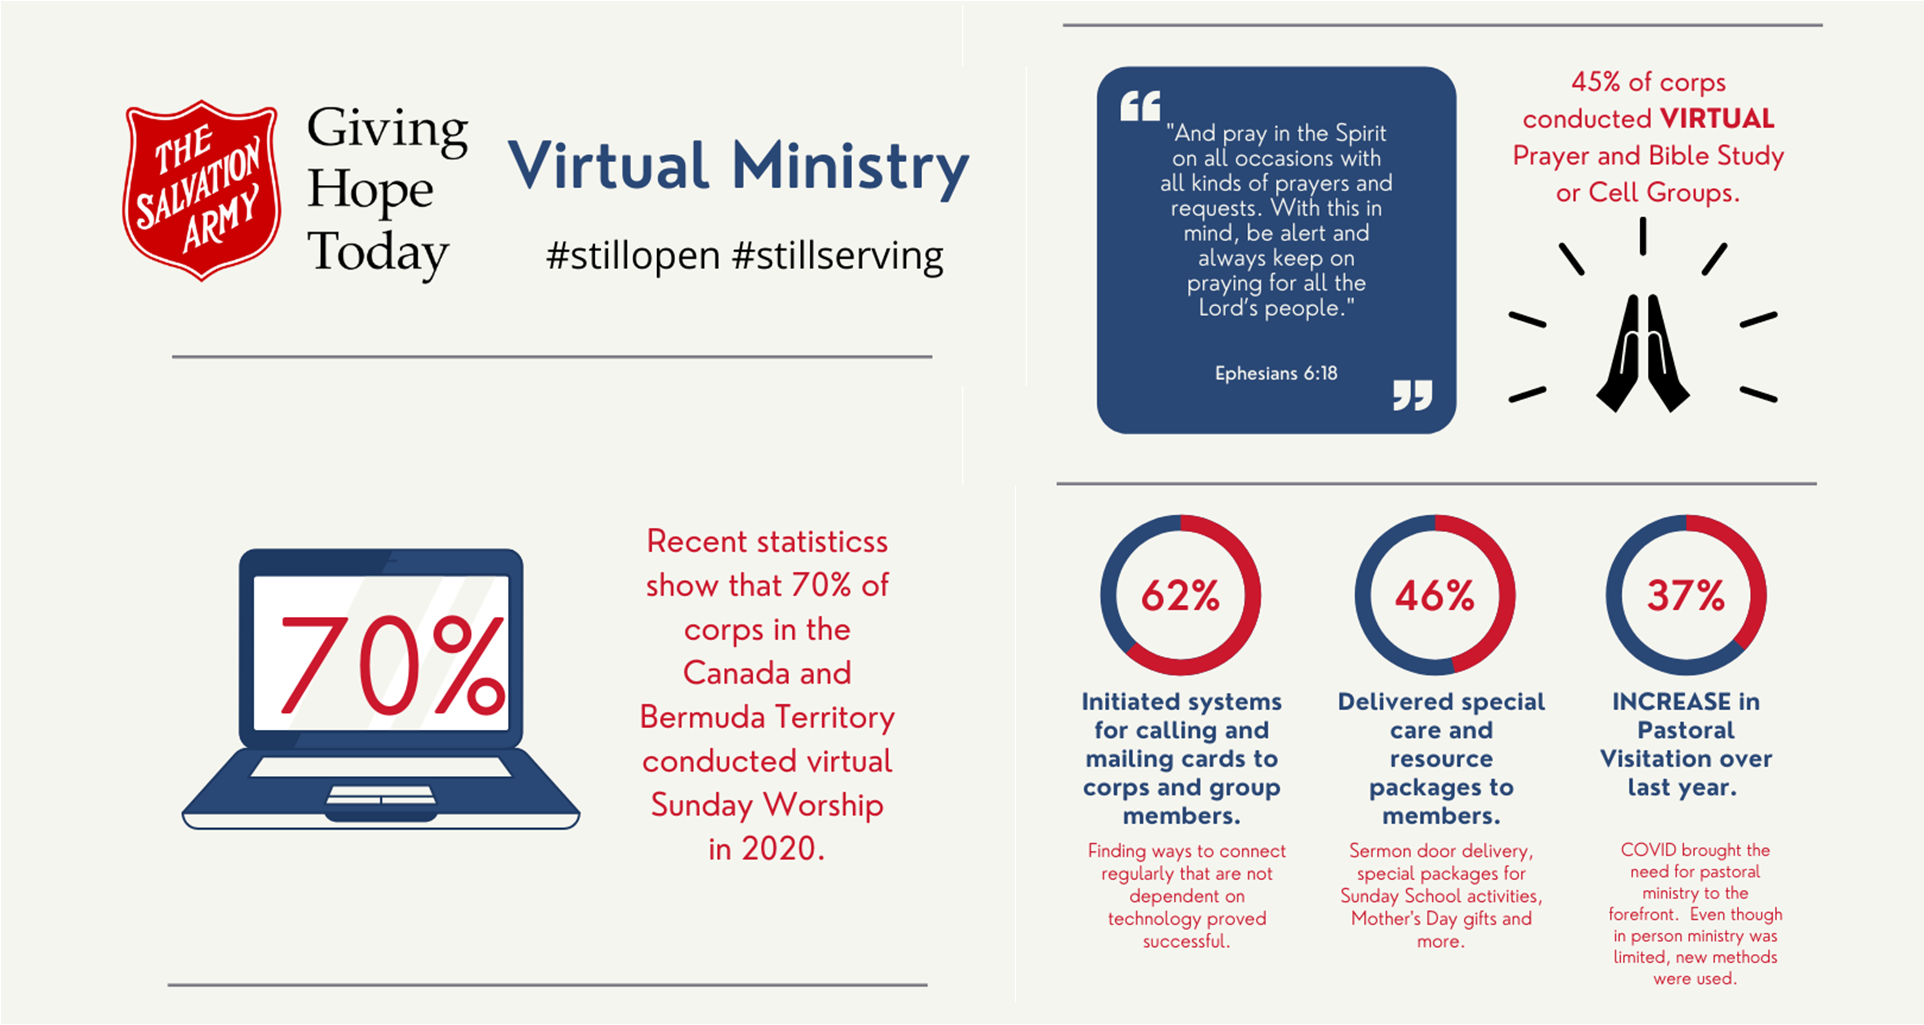 Virtual Corps Ministry #stillopen, #stillserving 70% Recent statisticss show that 70% of corps in the Canada and Bermuda Territory conducted virtual Sunday Worship in 2020. "And pray in the Spirit on all occasions with all kinds of prayers and requests. With this in mind, be alert and always keep on praying for all the Lord’s people." Ephesians 6:18 45% of corps conducted VIRTUAL Prayer and Bible Study or Cell Groups. 62% Initiated systems for calling and mailing cards to corps and group members.Finding ways to connect regularly that are not dependent on technology proved successful. 46% Delivered special care and resource packages to members. Sermon door delivery, special packages for Sunday School activities, Mother's Day gifts and more. 37% INCREASE in Pastoral Visitation over last year. COVID brought the need for pastoral ministry to the forefront. Even though in person ministry was limited, new methods were used. Throughout the pandemic Salvation Army corps have made every effort to connect with members and those in need in the community. Community & Family Services locations with the financial aid of Agriculture Canada record the following: 12,277,156 pounds of food distributed $709,715 distributed in gift cards 1,168,019 meals served 285,082 households served 30,031 new households served. For information on entering SAMIS information visit www.saMissionResource.ca/samis-help